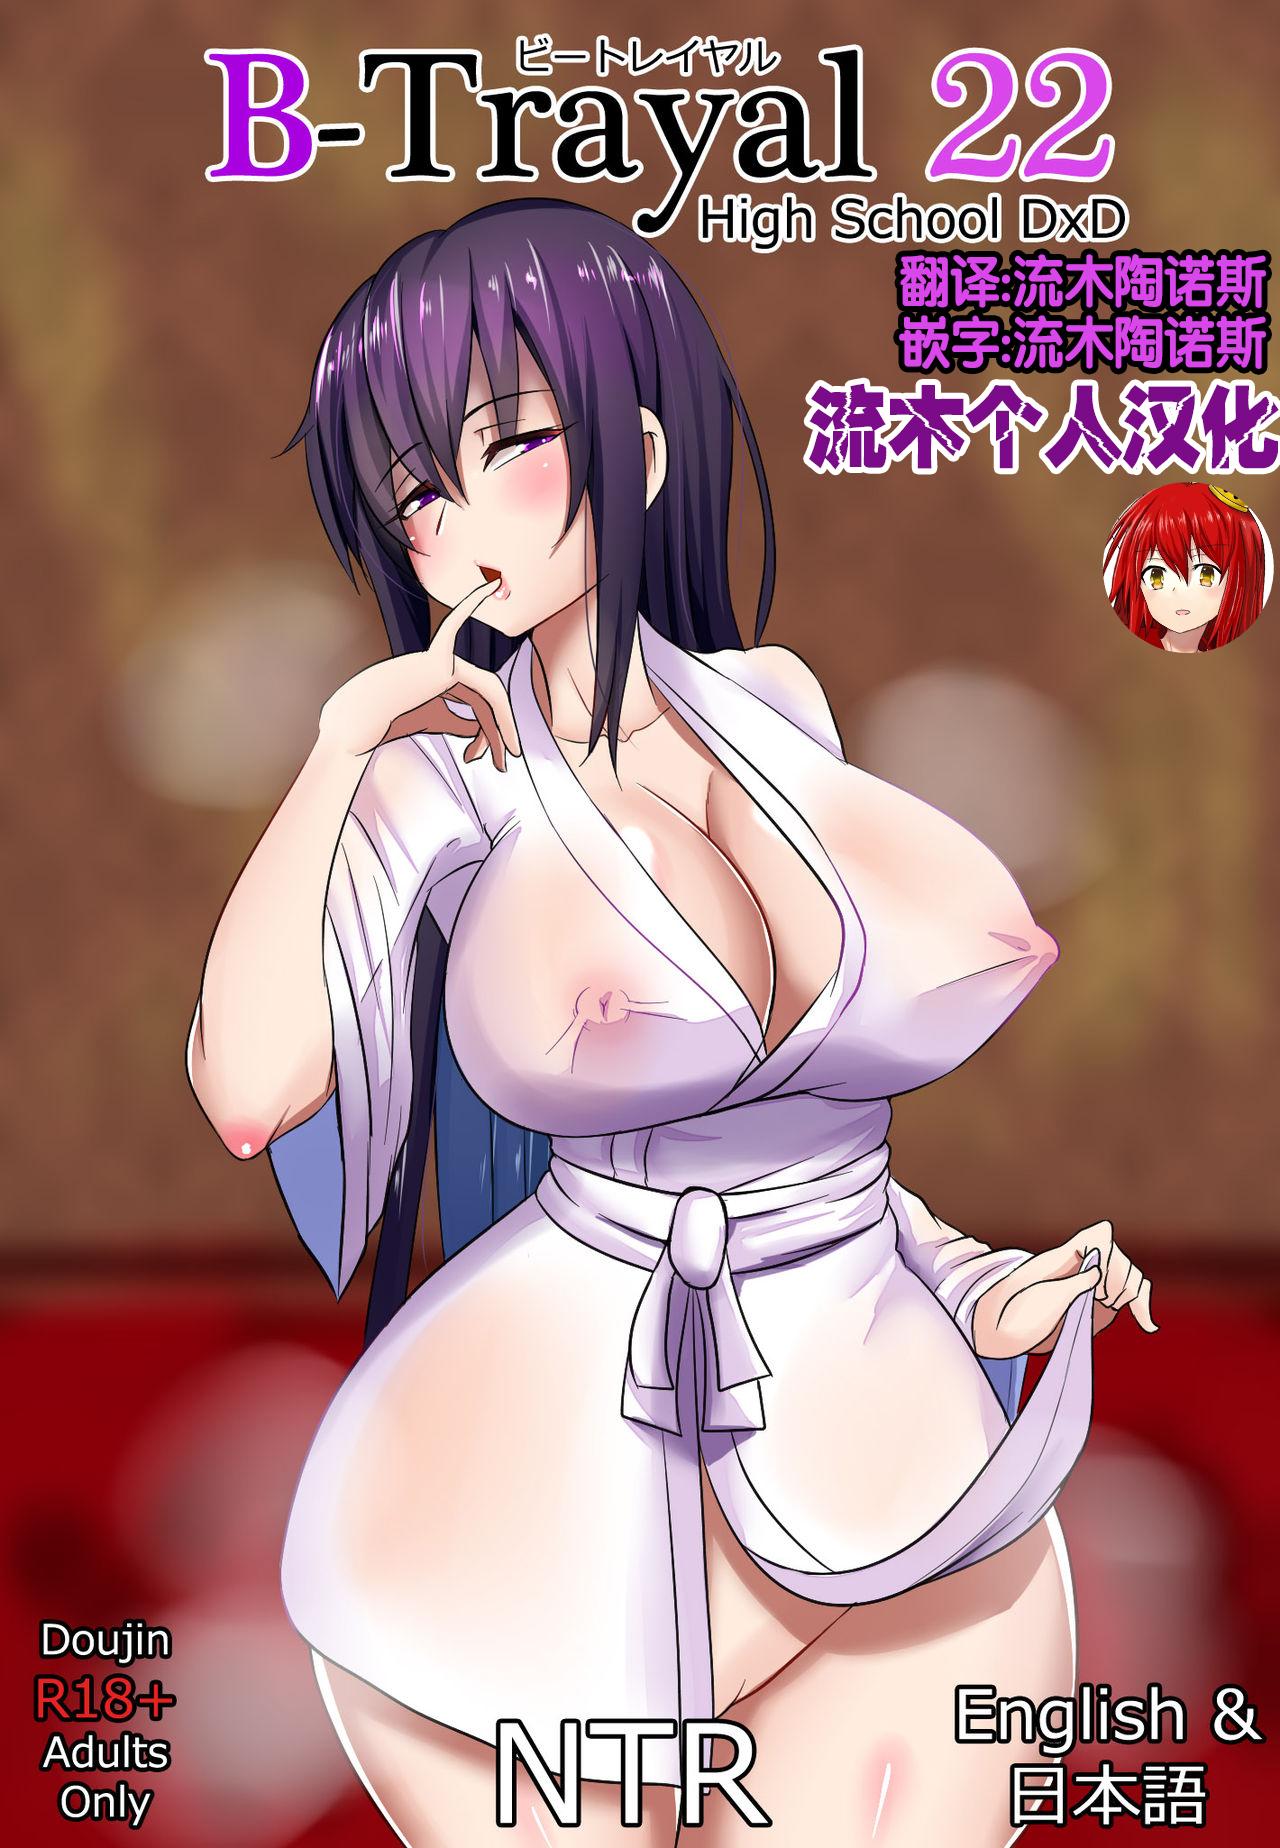 Special Locations B-TRAYAL 22 Akeno - Highschool dxd Cowgirl - Page 1